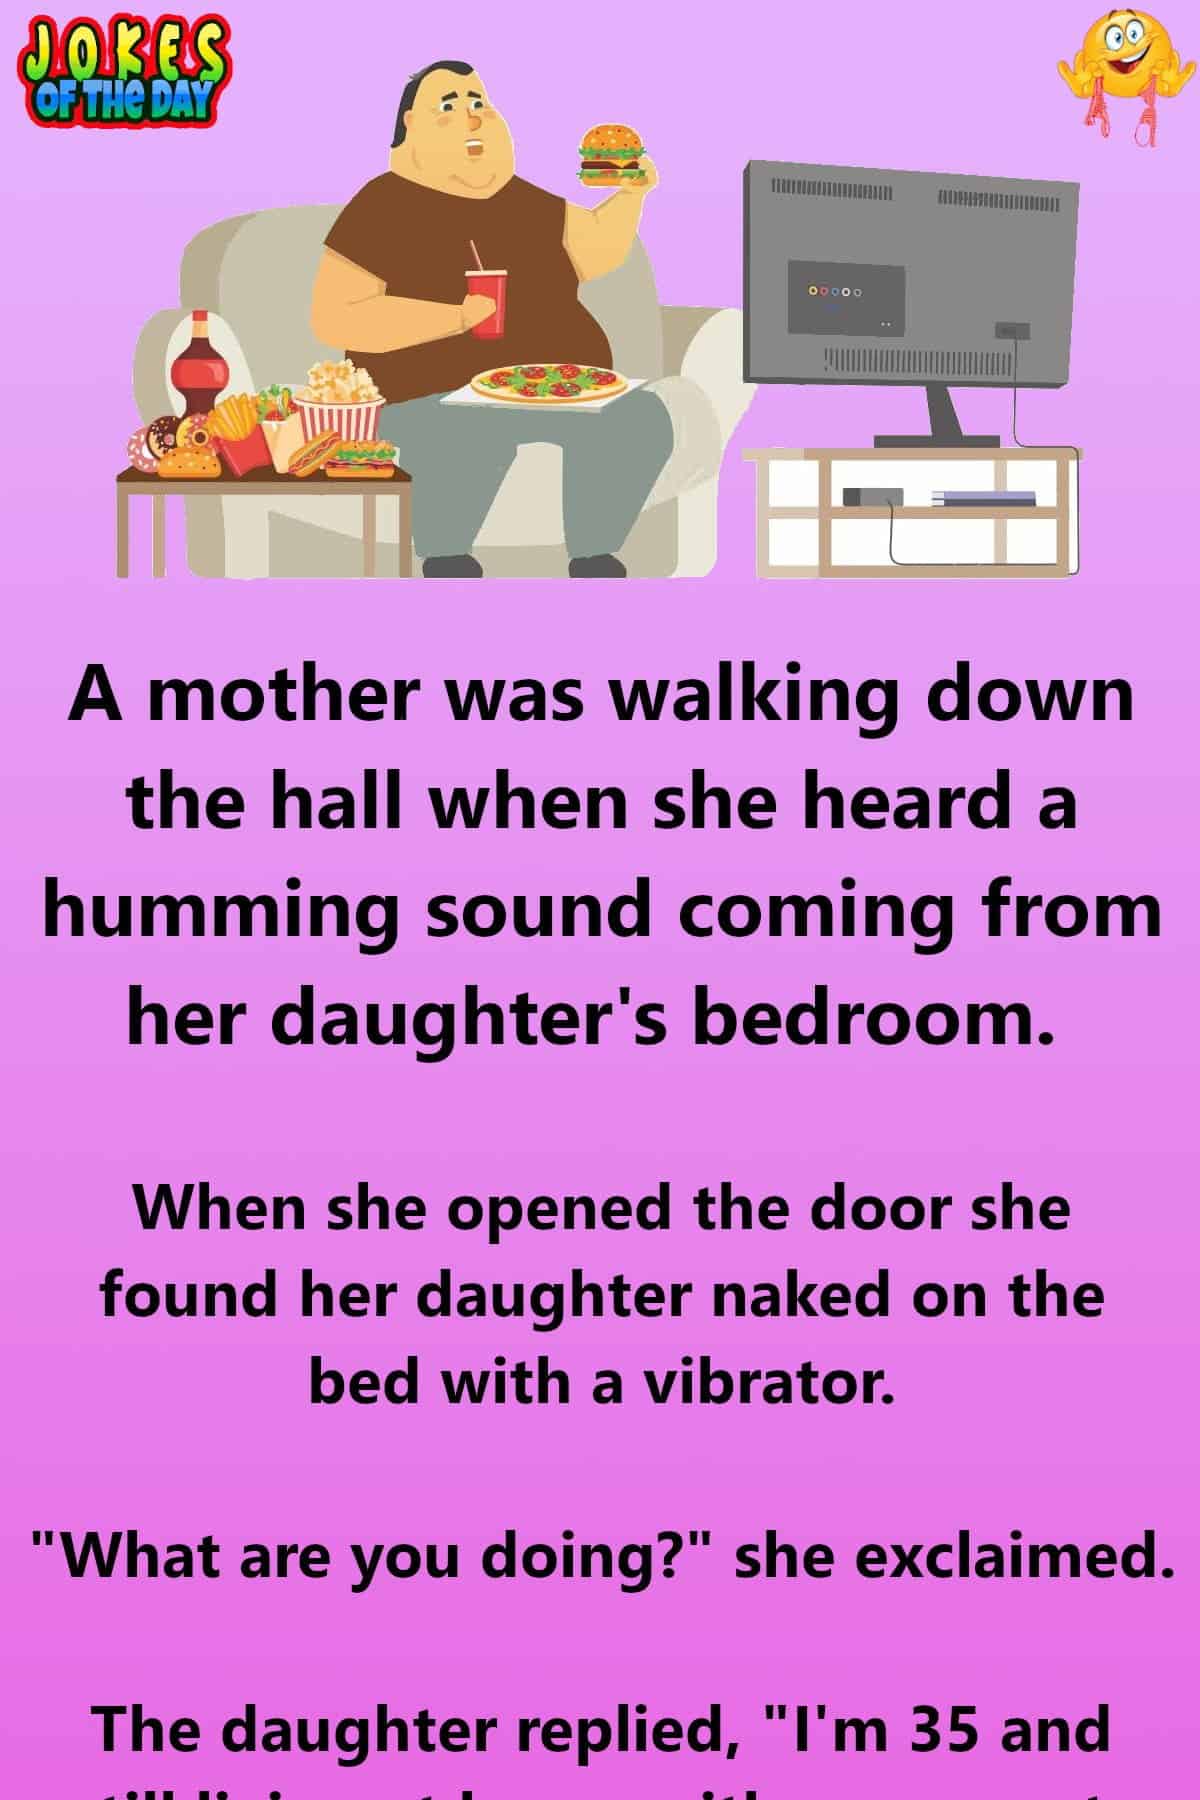 Parenting Humor - She Heard A Strange Buzzing Noise From Her Daughter’s Bedroom